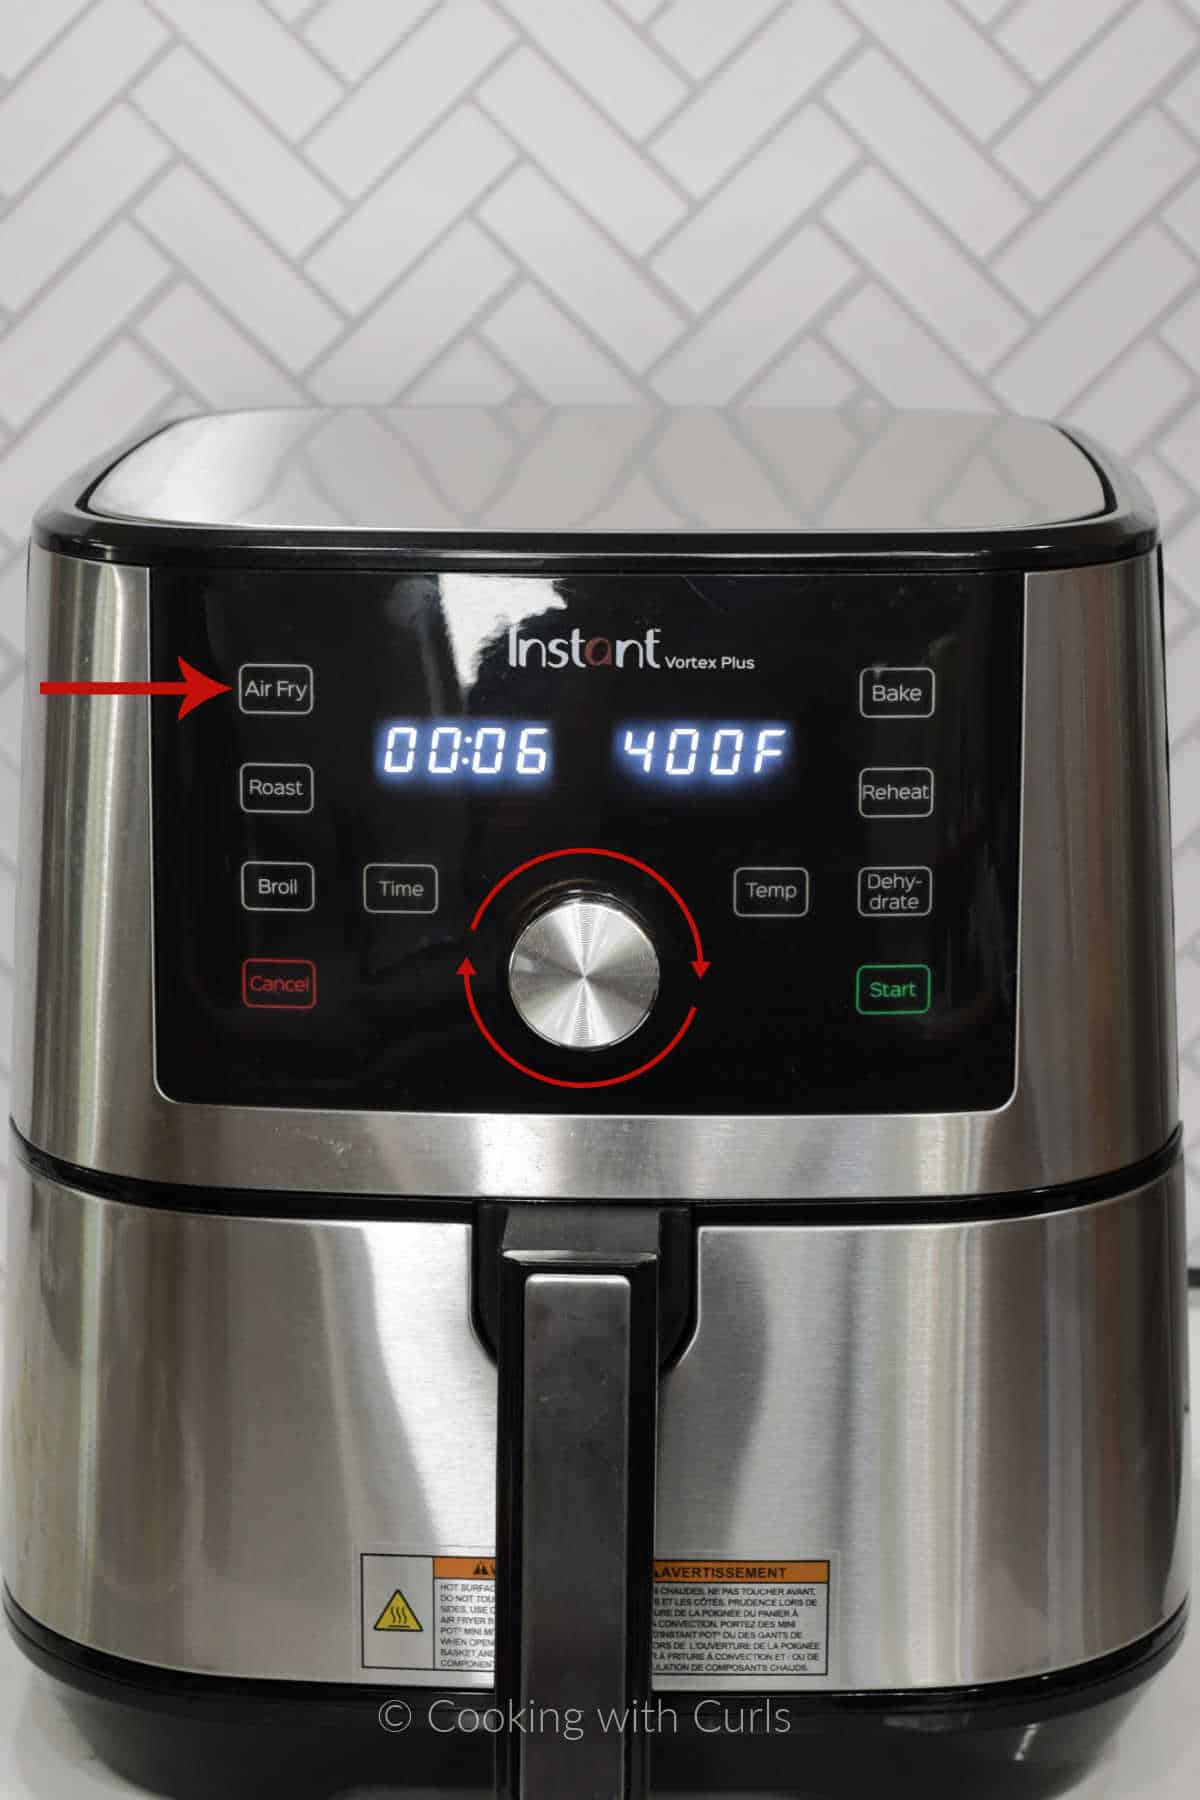 Air fryer set to six minutes at 400 degrees.